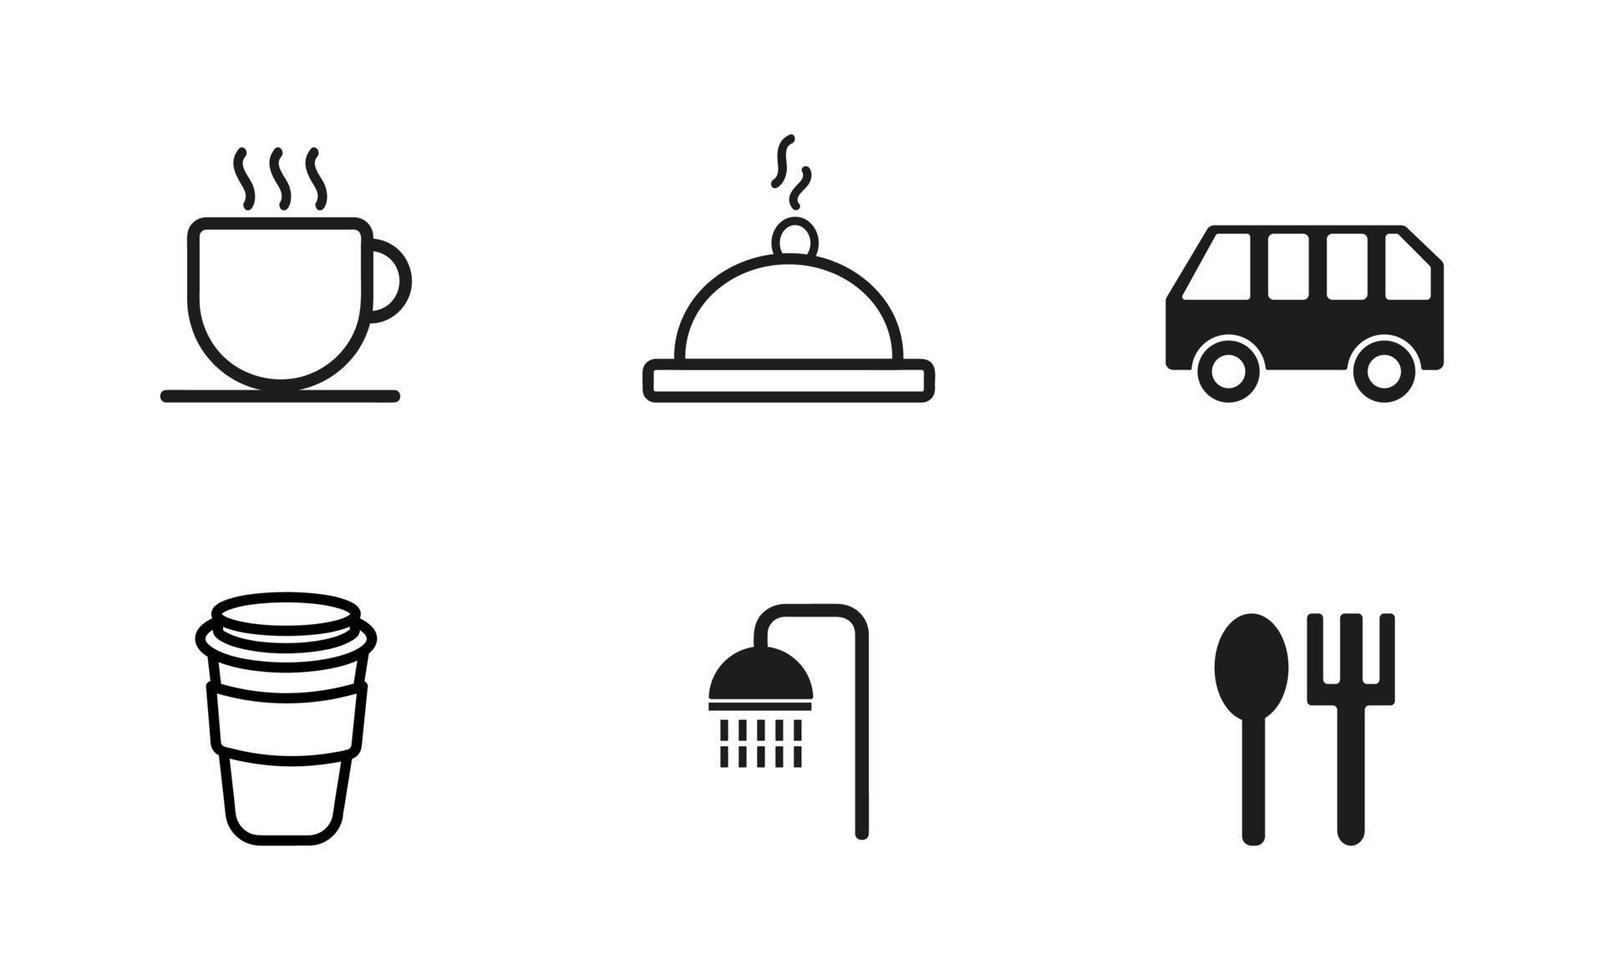 wayfinding signage icons vector